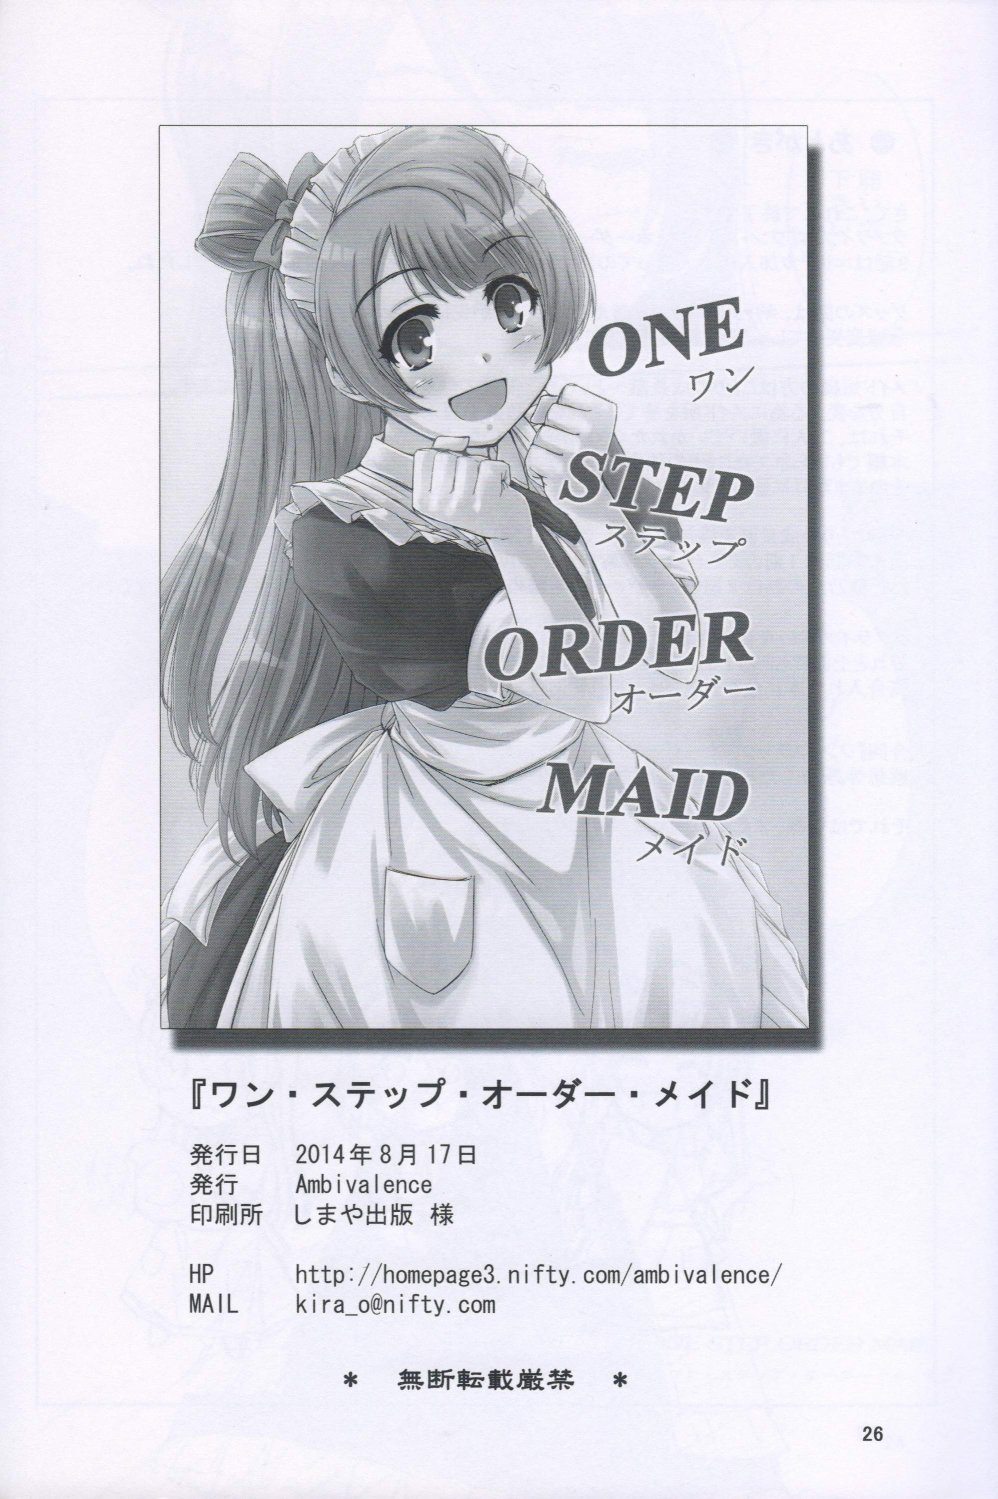 LoveLive - one step order maid - 1